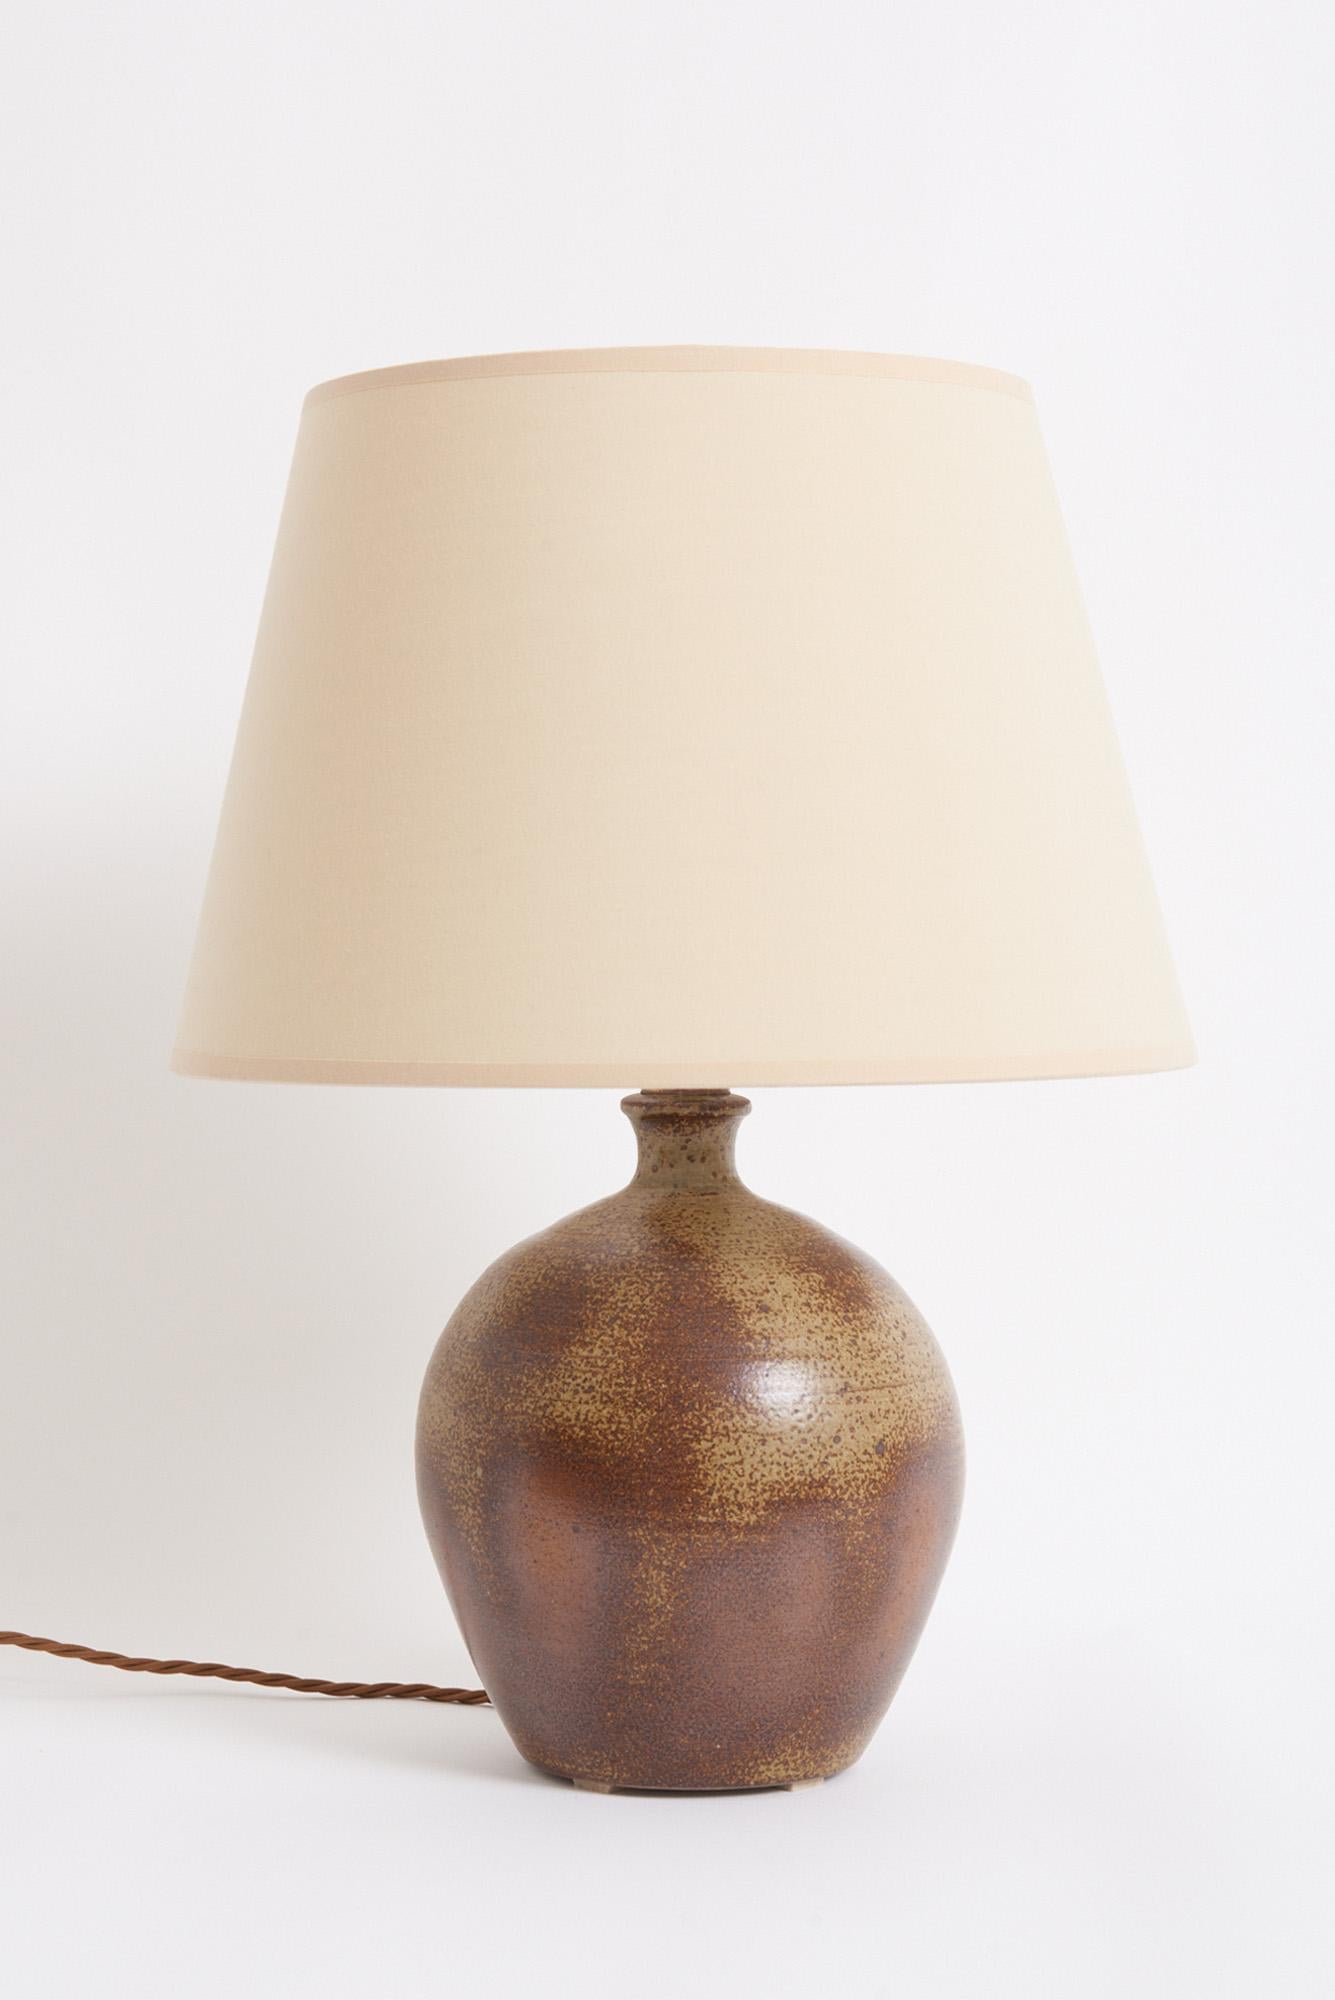 A turned stoneware table lamp.
France, 1960s
With the shade: 48 cm high by 35 cm diameter
Lamp base only: 30 cm high by 20 cm diameter